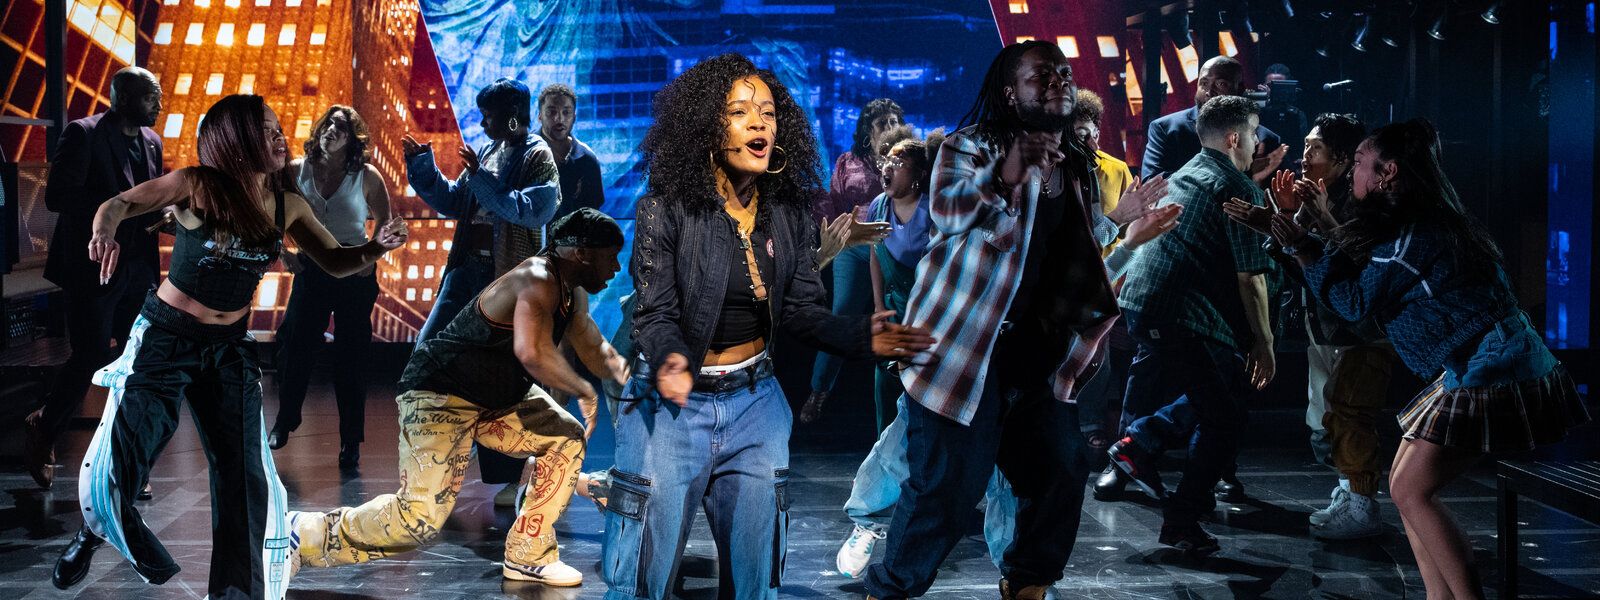 Maleah Joi Moon, center, as Ali, singing Alicia Keys’s “Empire State of Mind” in the musical “Hell’s Kitchen” at the Public Theater in Manhattan. / Photo:  Sara Krulwich/The New York Times